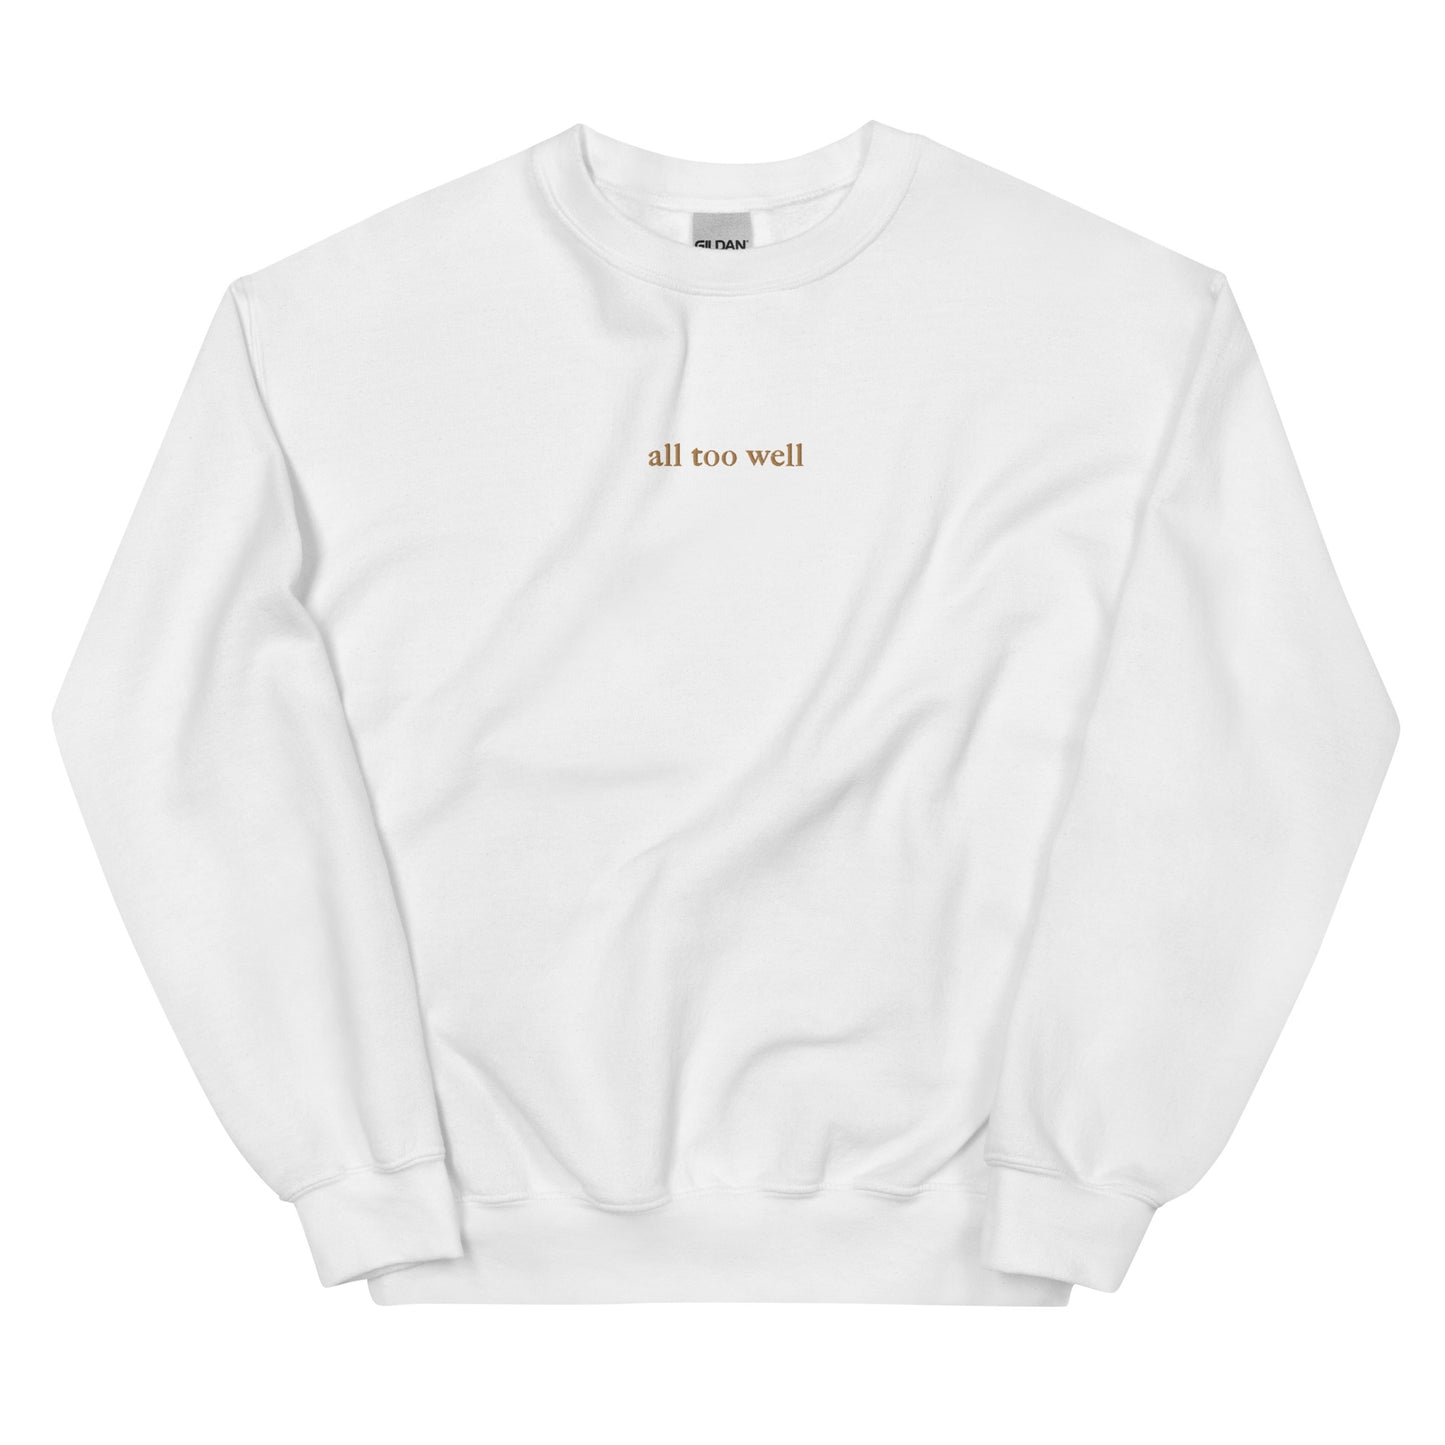 all too well embroidered sweatshirt